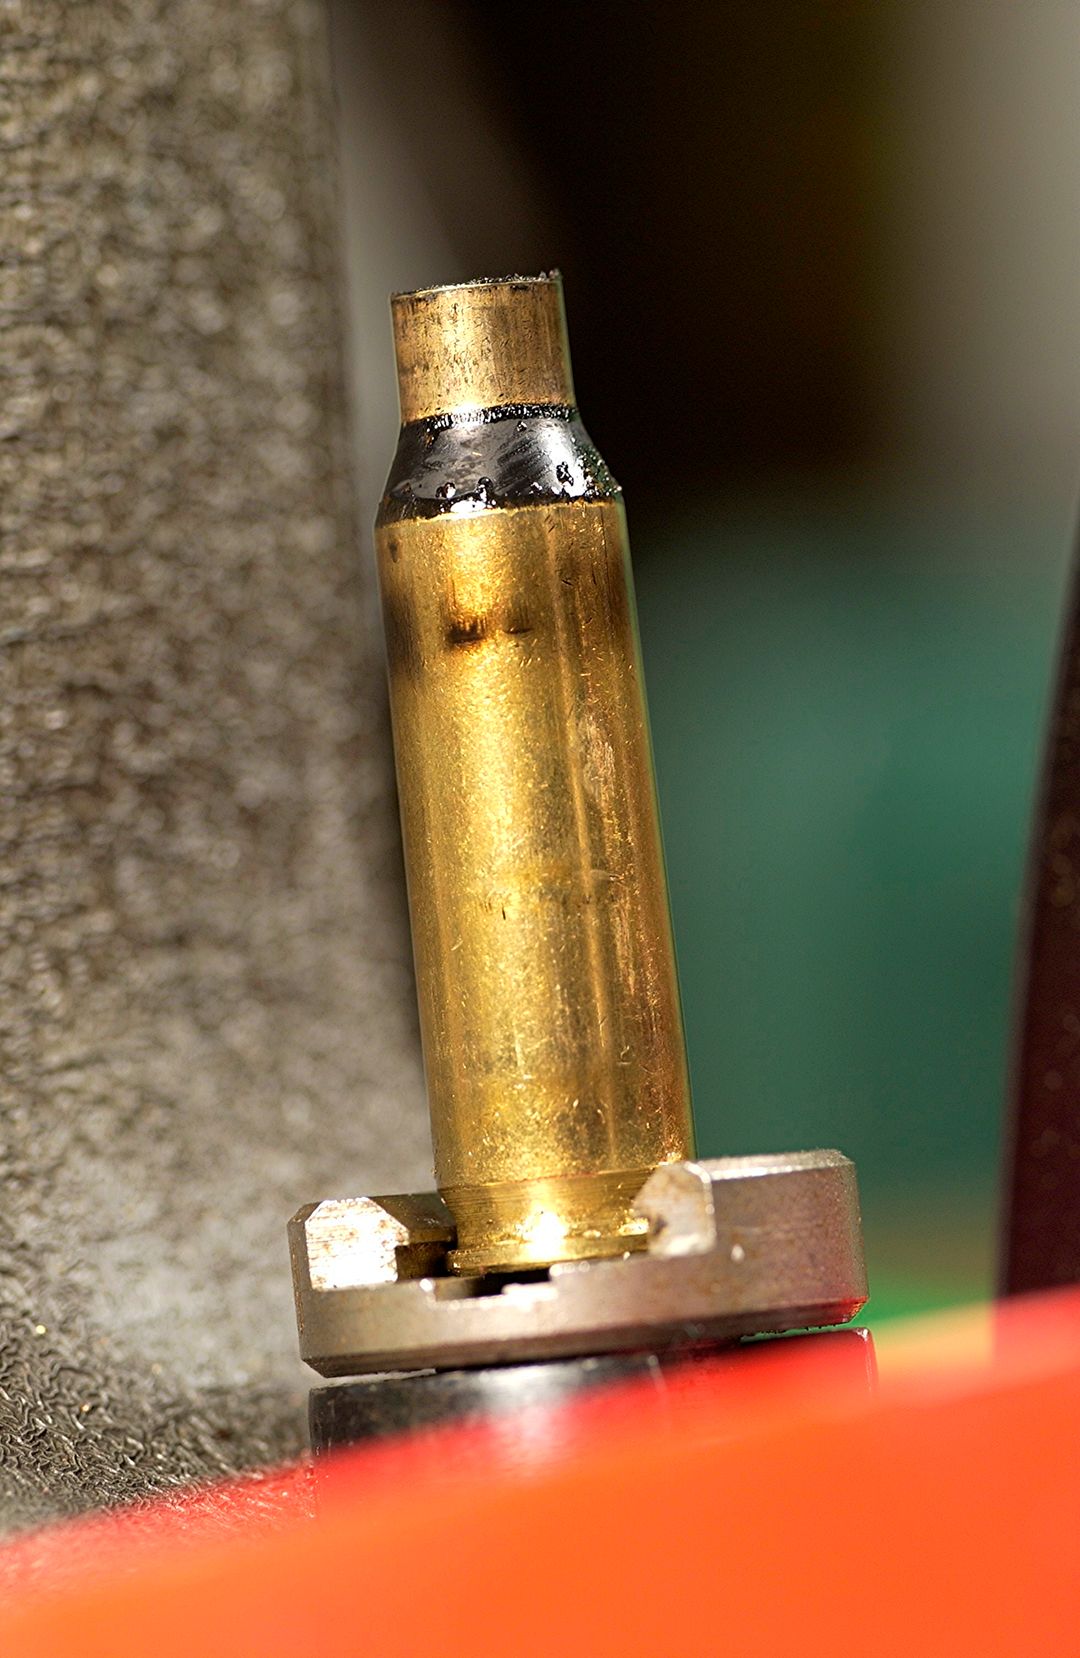 When reloading the .221 Fireball, it is always a good idea to neck size the cases only after fireforming. This not only leads to better accuracy but a longer case life as well.